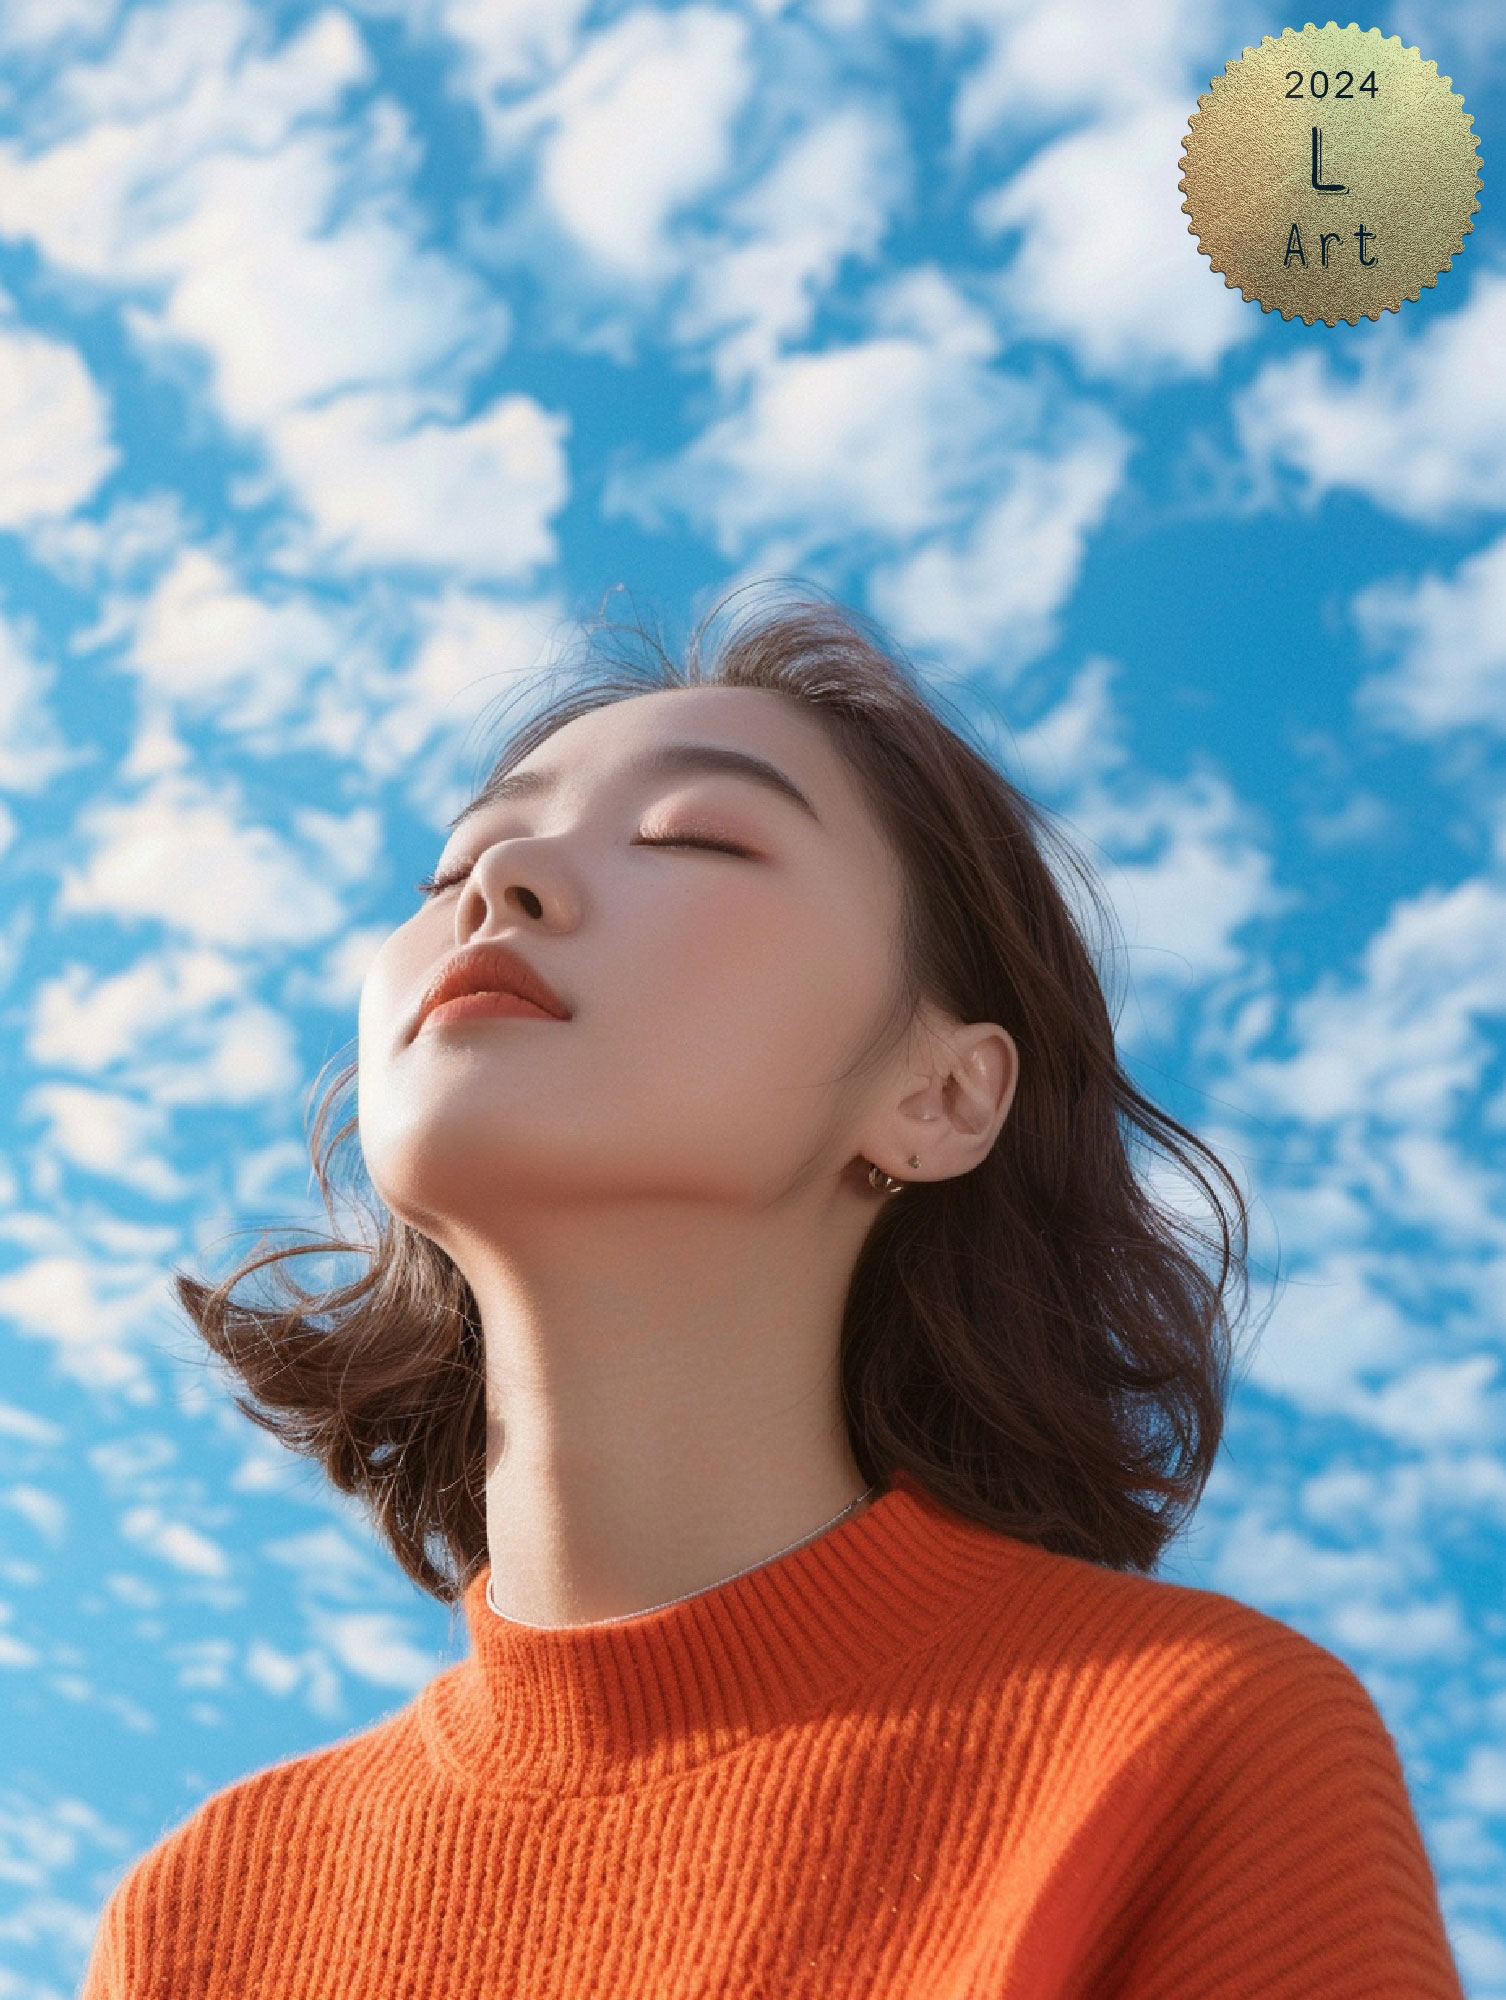 wangweizhi_A_Chinese_woman_looking_up_at_the_sky_blue_sky_and_w_2d5ef423-7f5b-4671-9487-770c7a3a8bf8.jpg